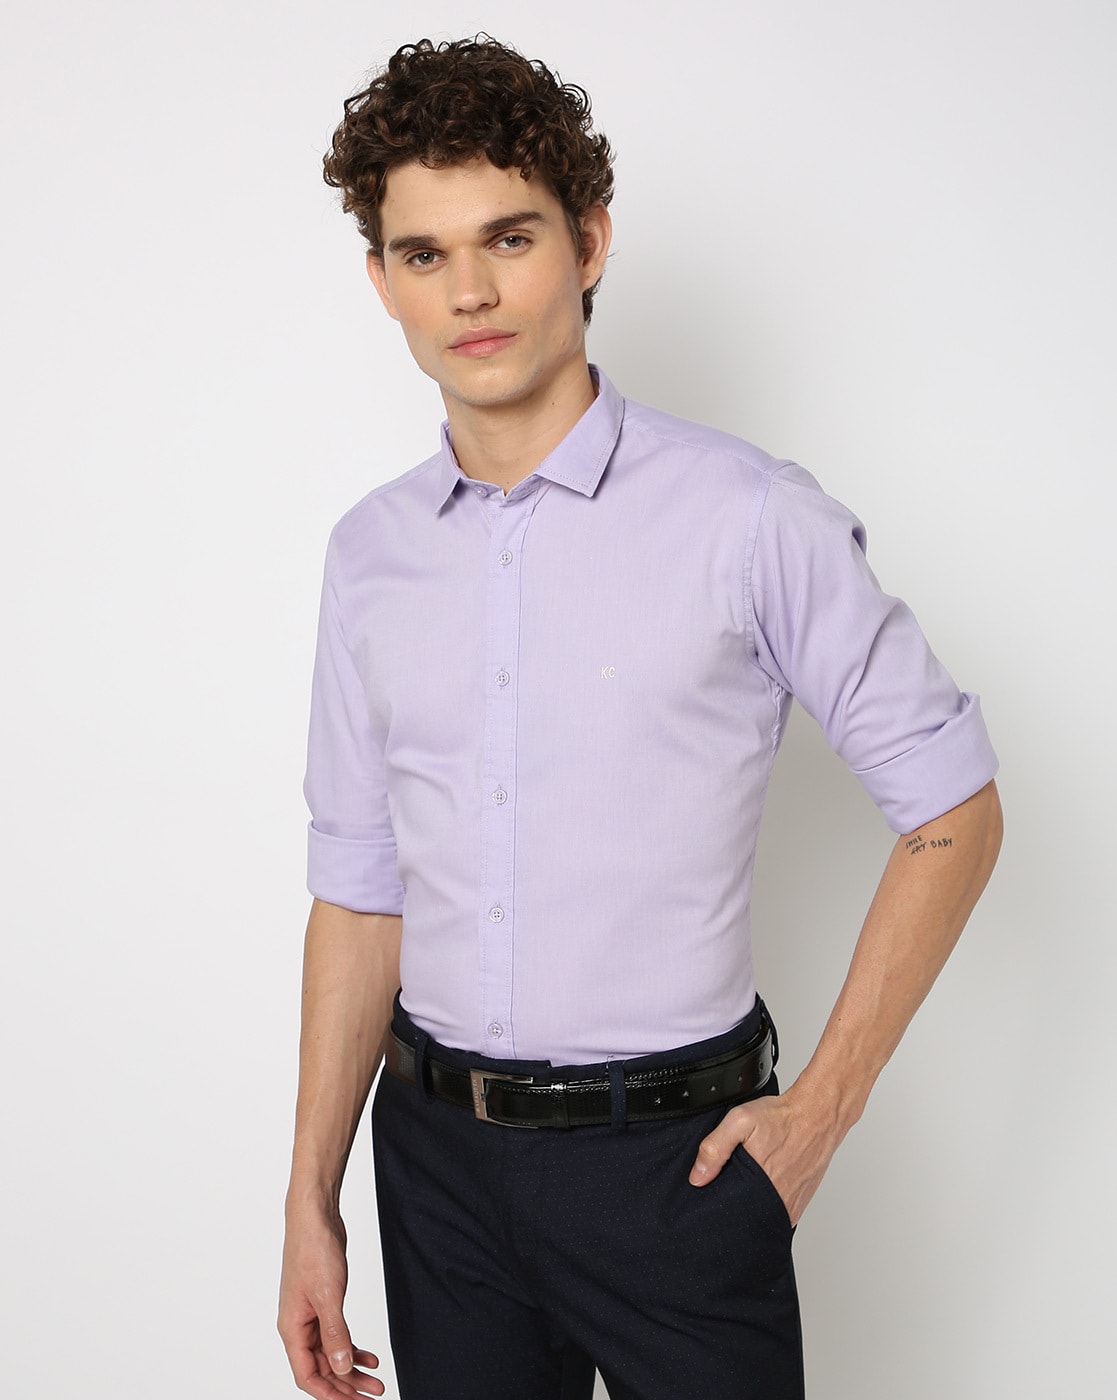 What color pants goes with a lavender shirt? - Quora